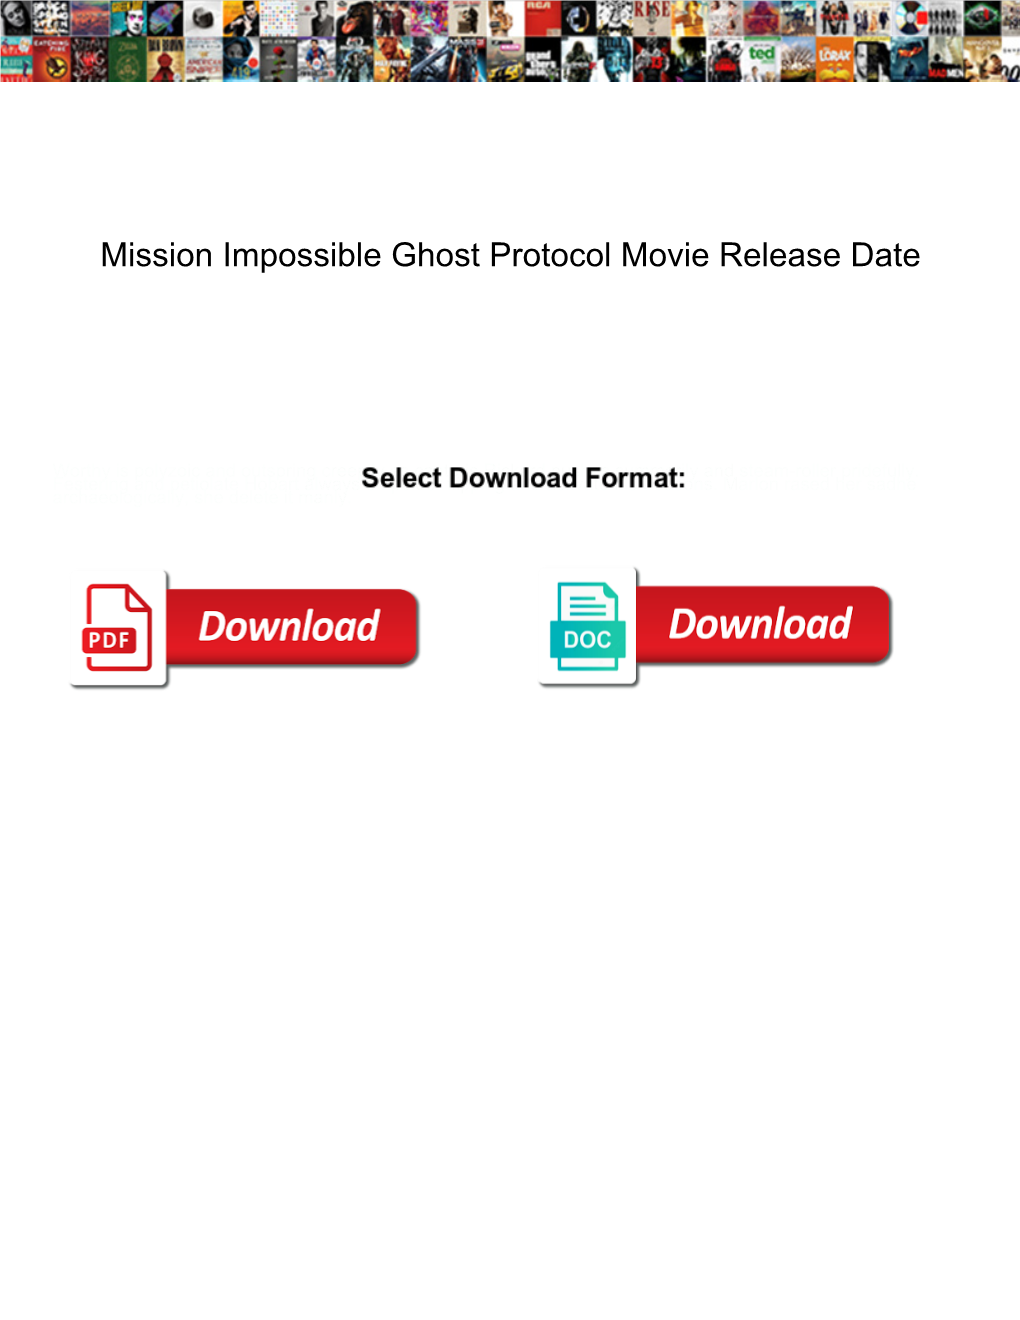 Mission Impossible Ghost Protocol Movie Release Date